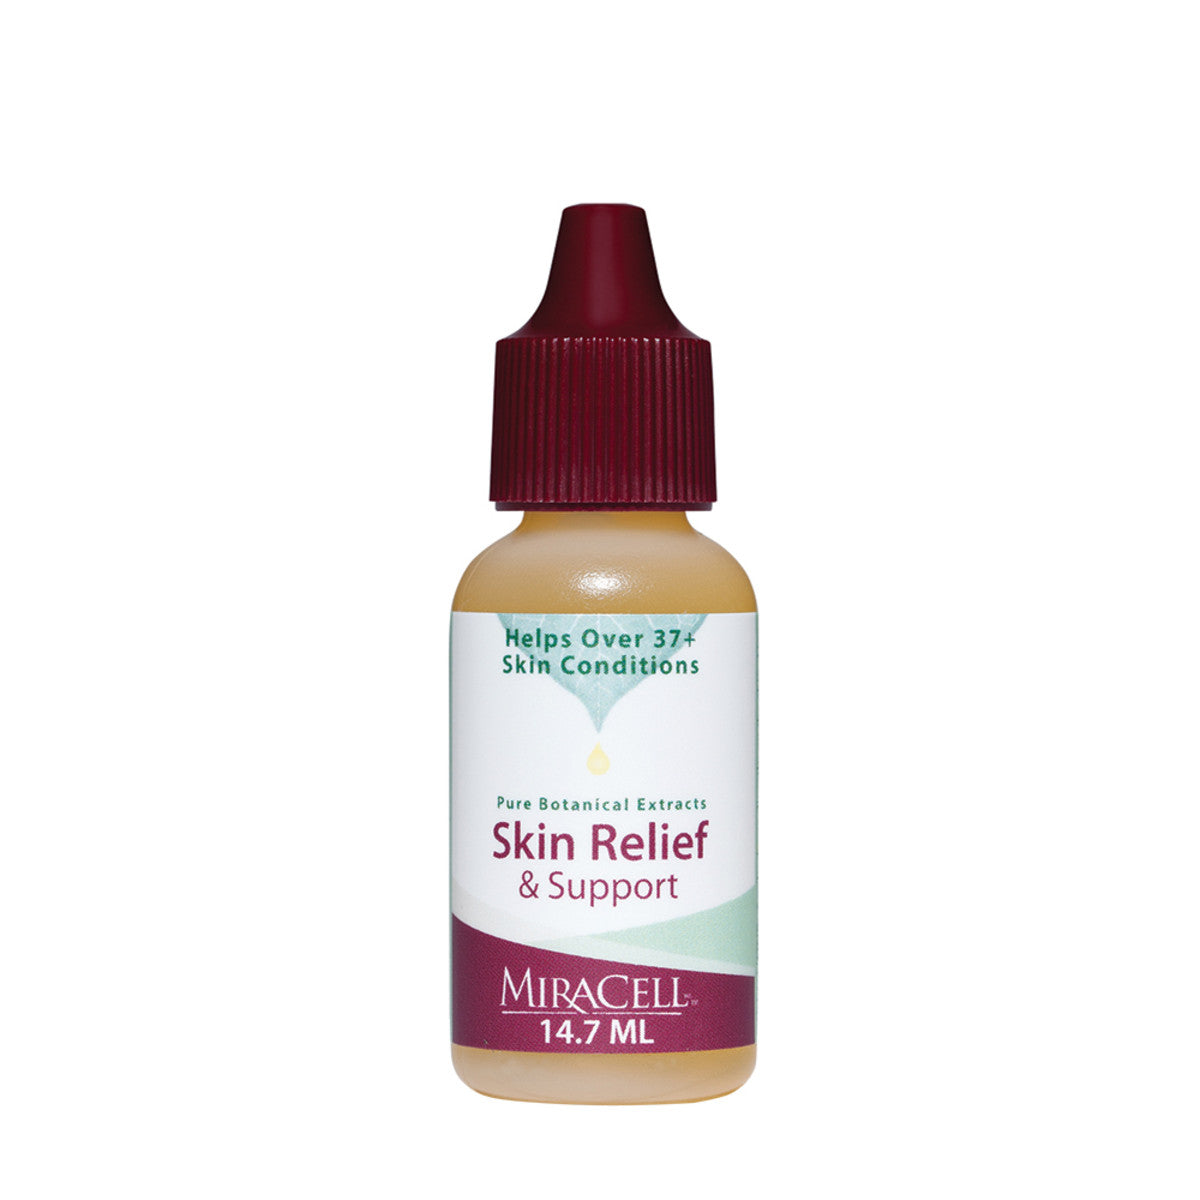 Nature's Sunshine - MiraCell Skin Relief & Support